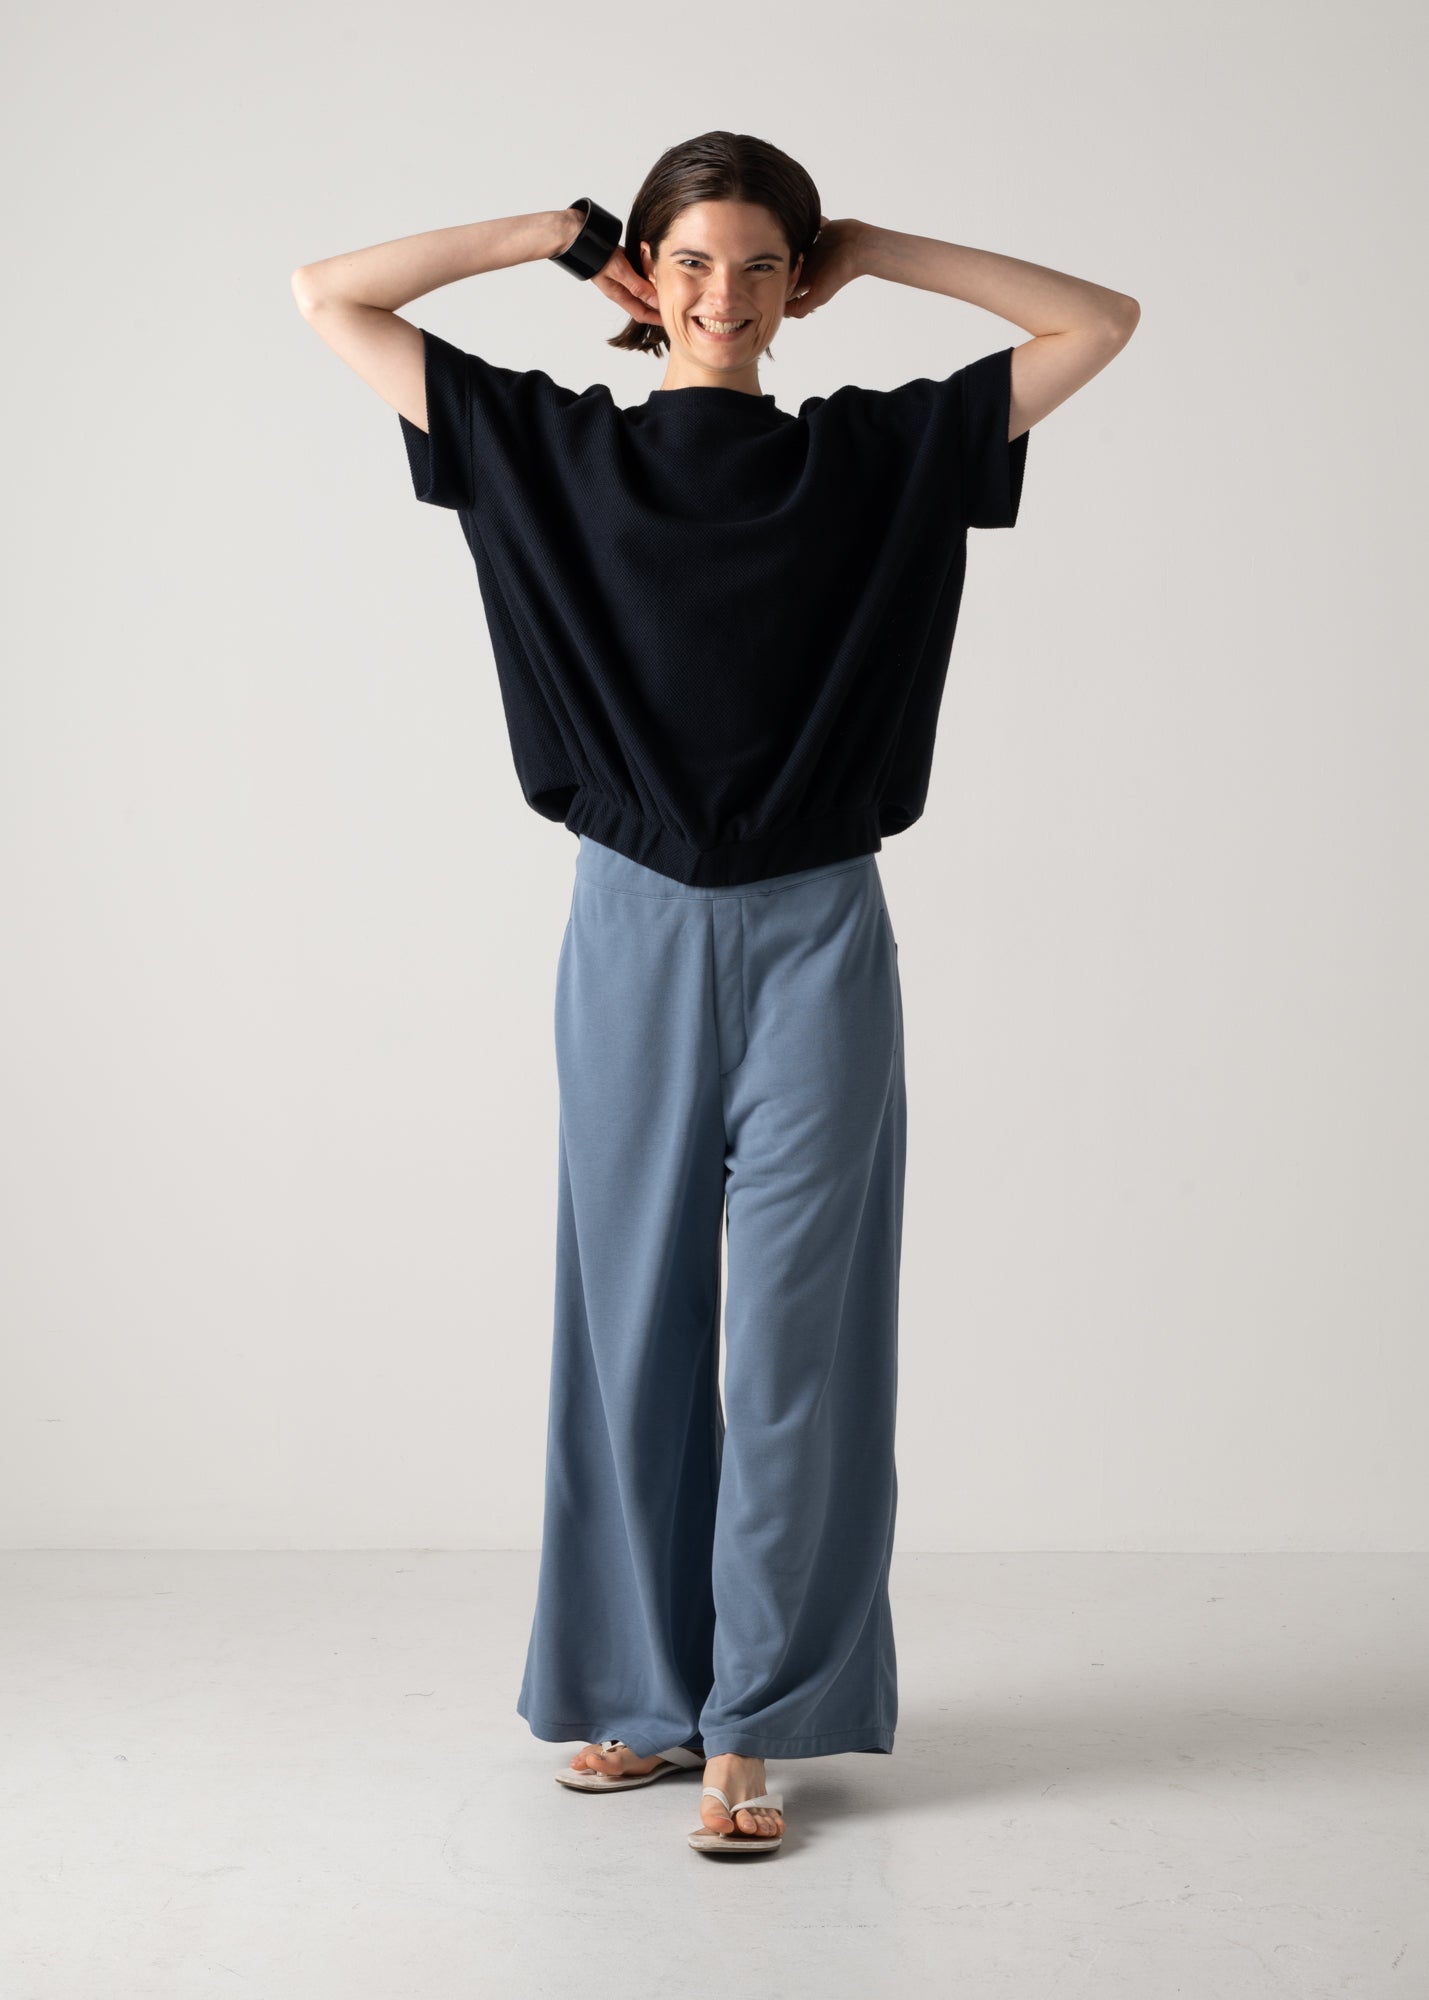 51 JULIA LONG CULOTTE / UV RESISTANT RECYCLED TERRY - C10